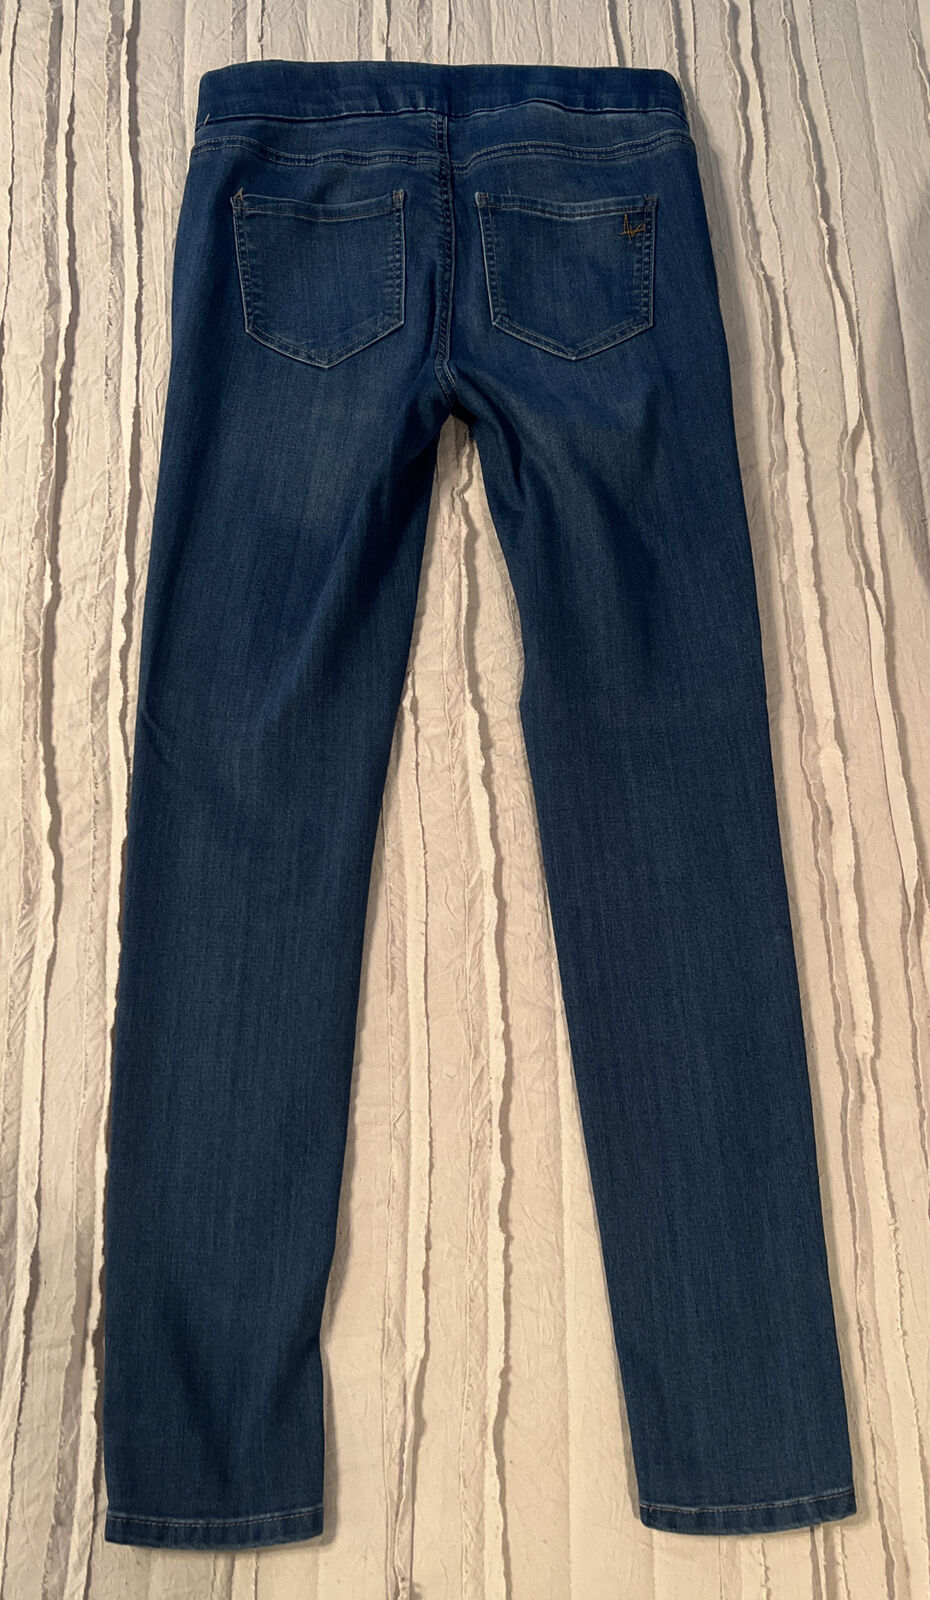 Liverpool Mira Skinny Jeans Size 8/29 - image 4